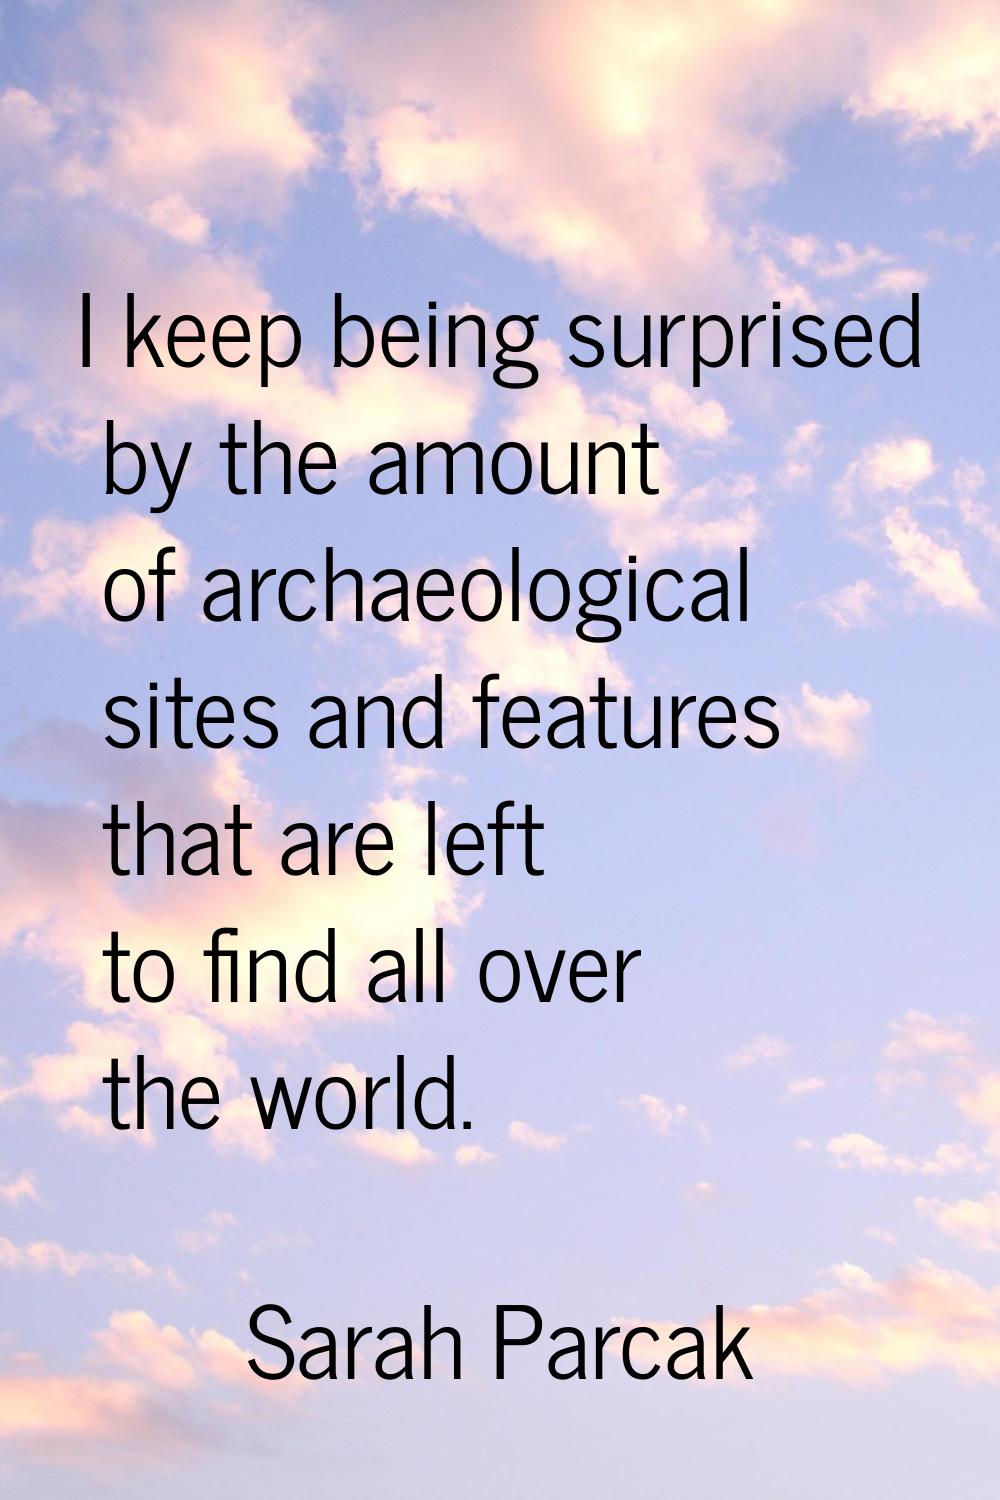 I keep being surprised by the amount of archaeological sites and features that are left to find all